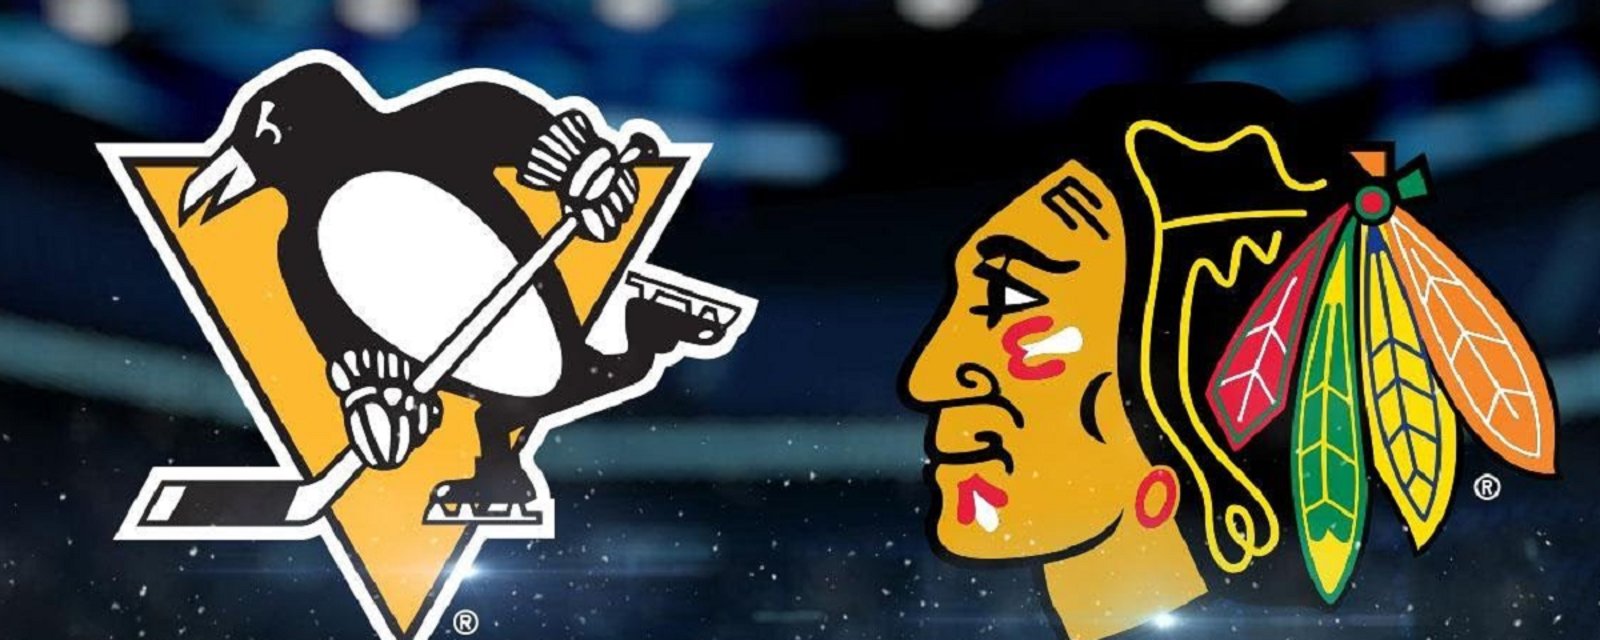 Penguins and Blackhawks make a trade on Saturday.